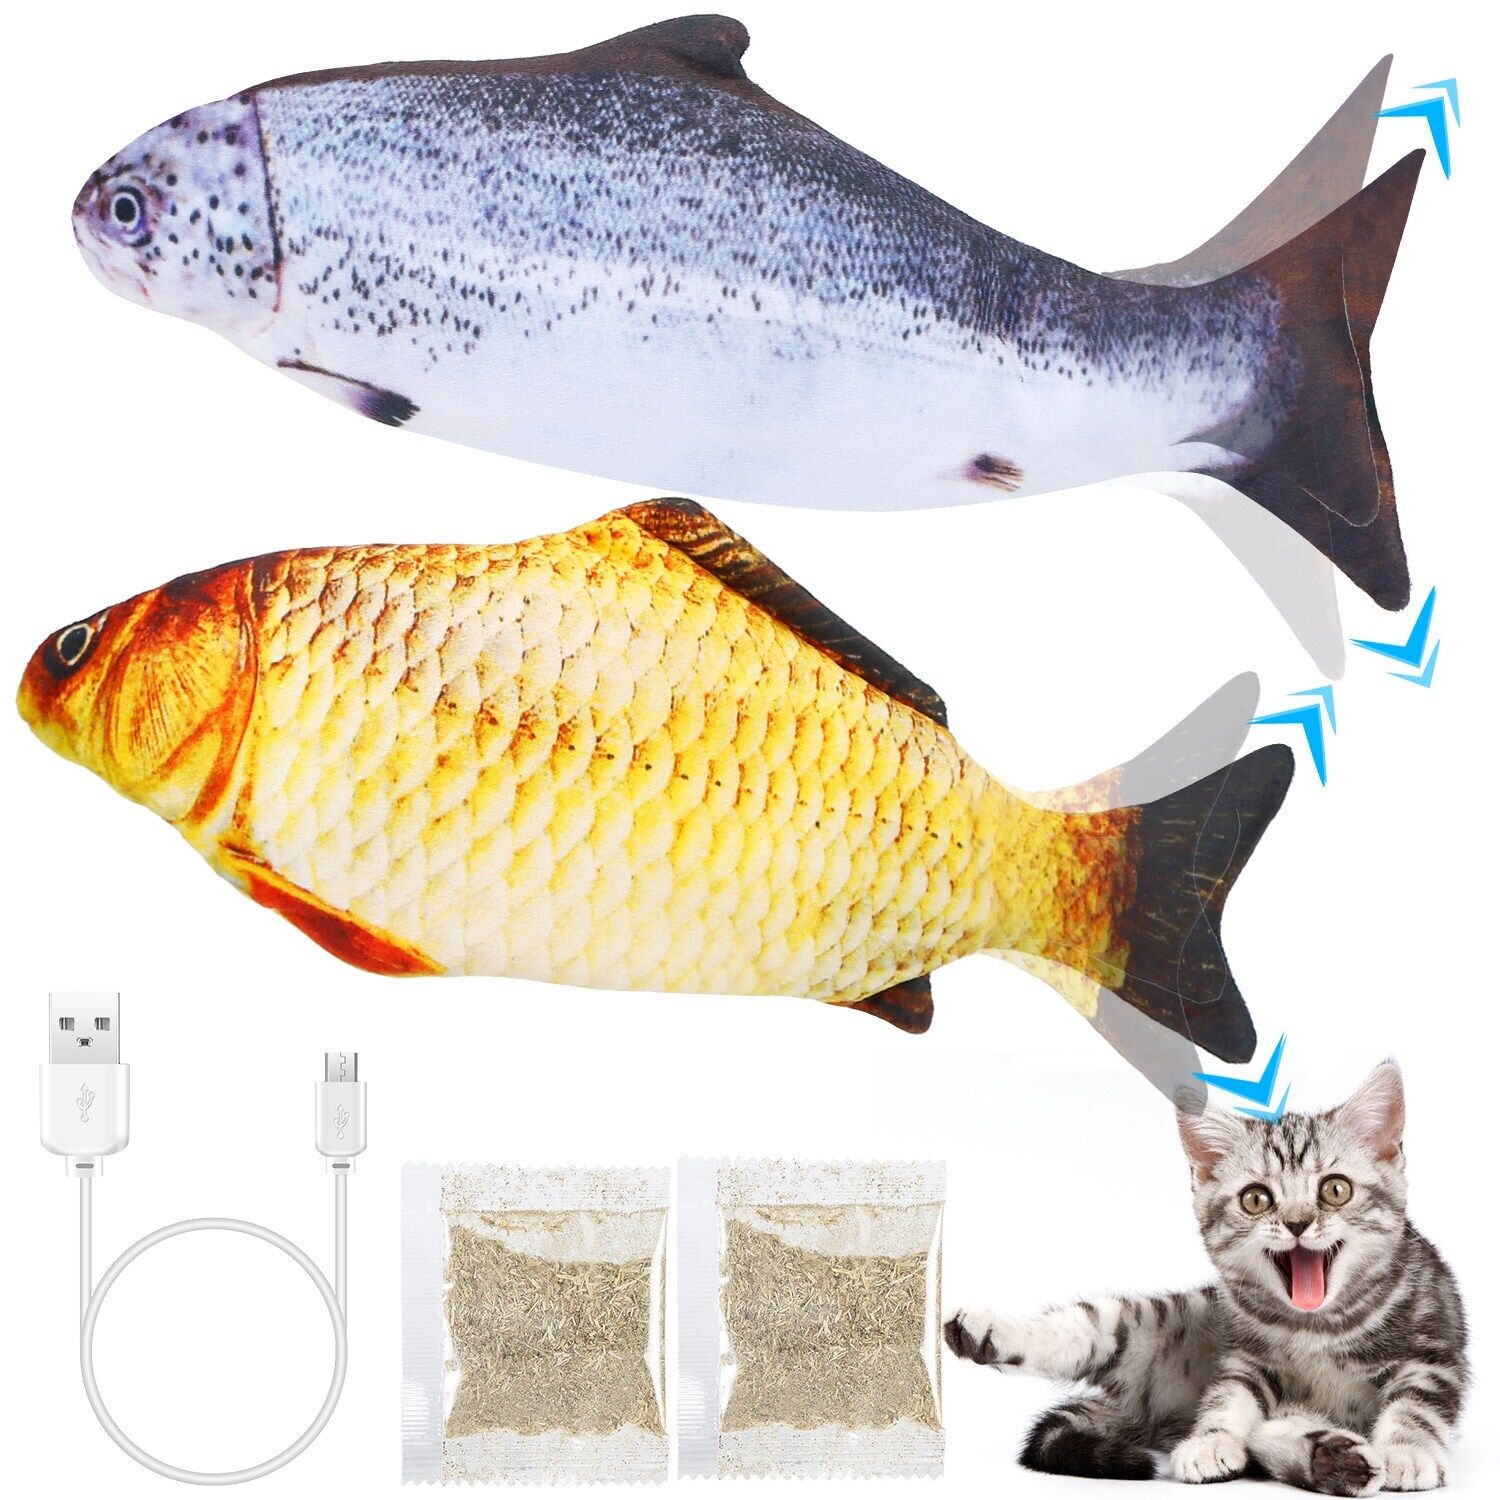 Flopping Fish Toy for Cat Kitten Interactive Fish Dog Toy Dancing Wiggle 2 Packs Unbranded Does not apply - фотография #8